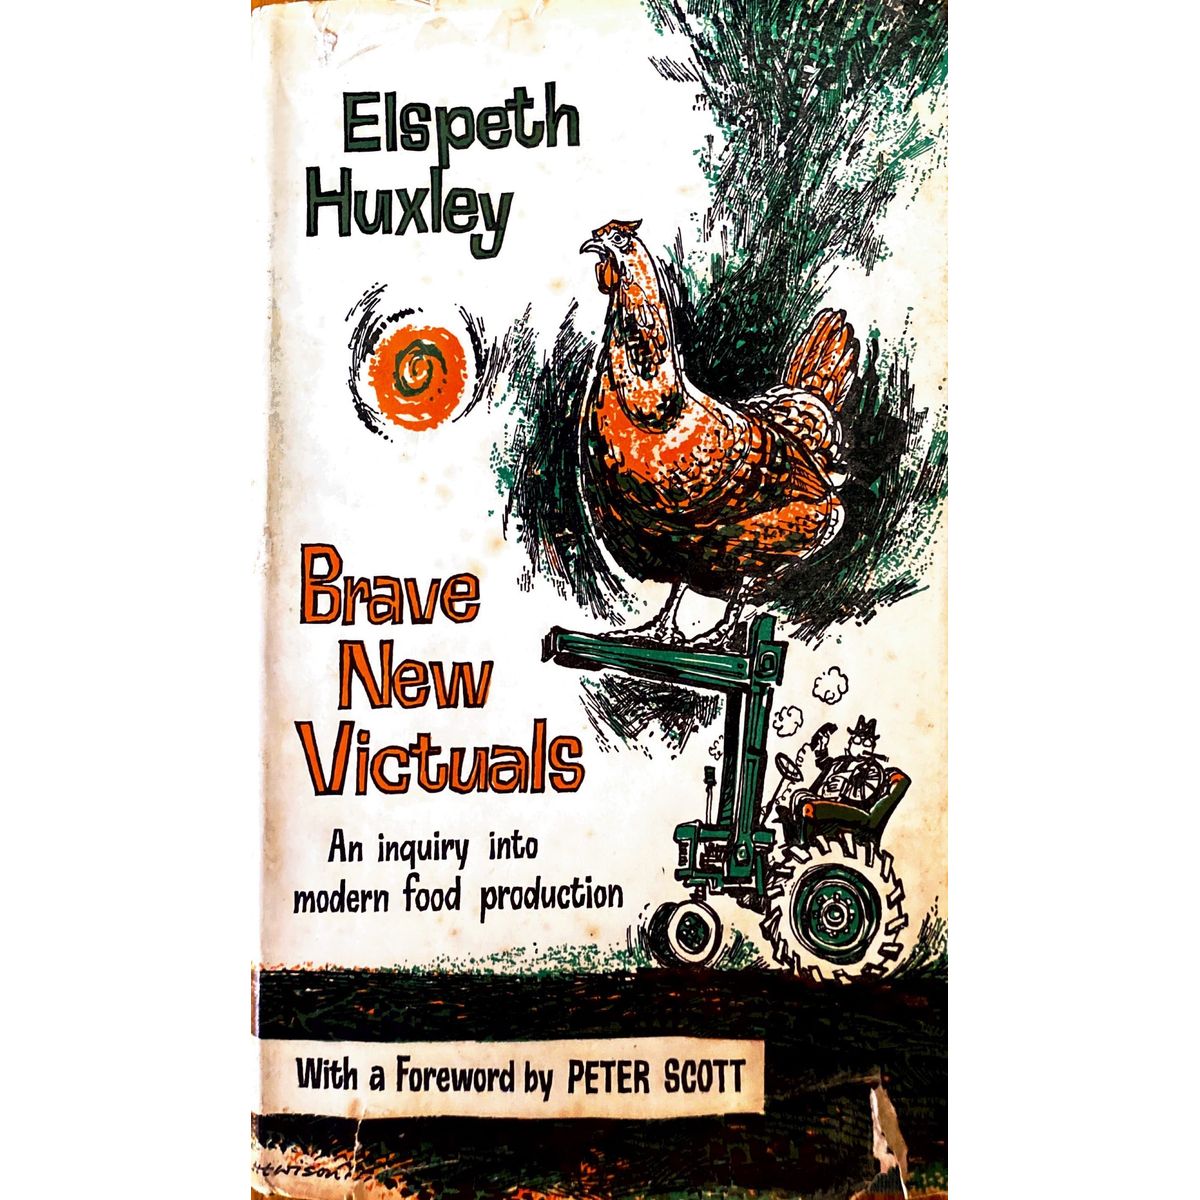 Brave New Victuals: An Inquiry Into Modern Food Production by Elspeth Huxley, foreword by Peter Scott [1965]